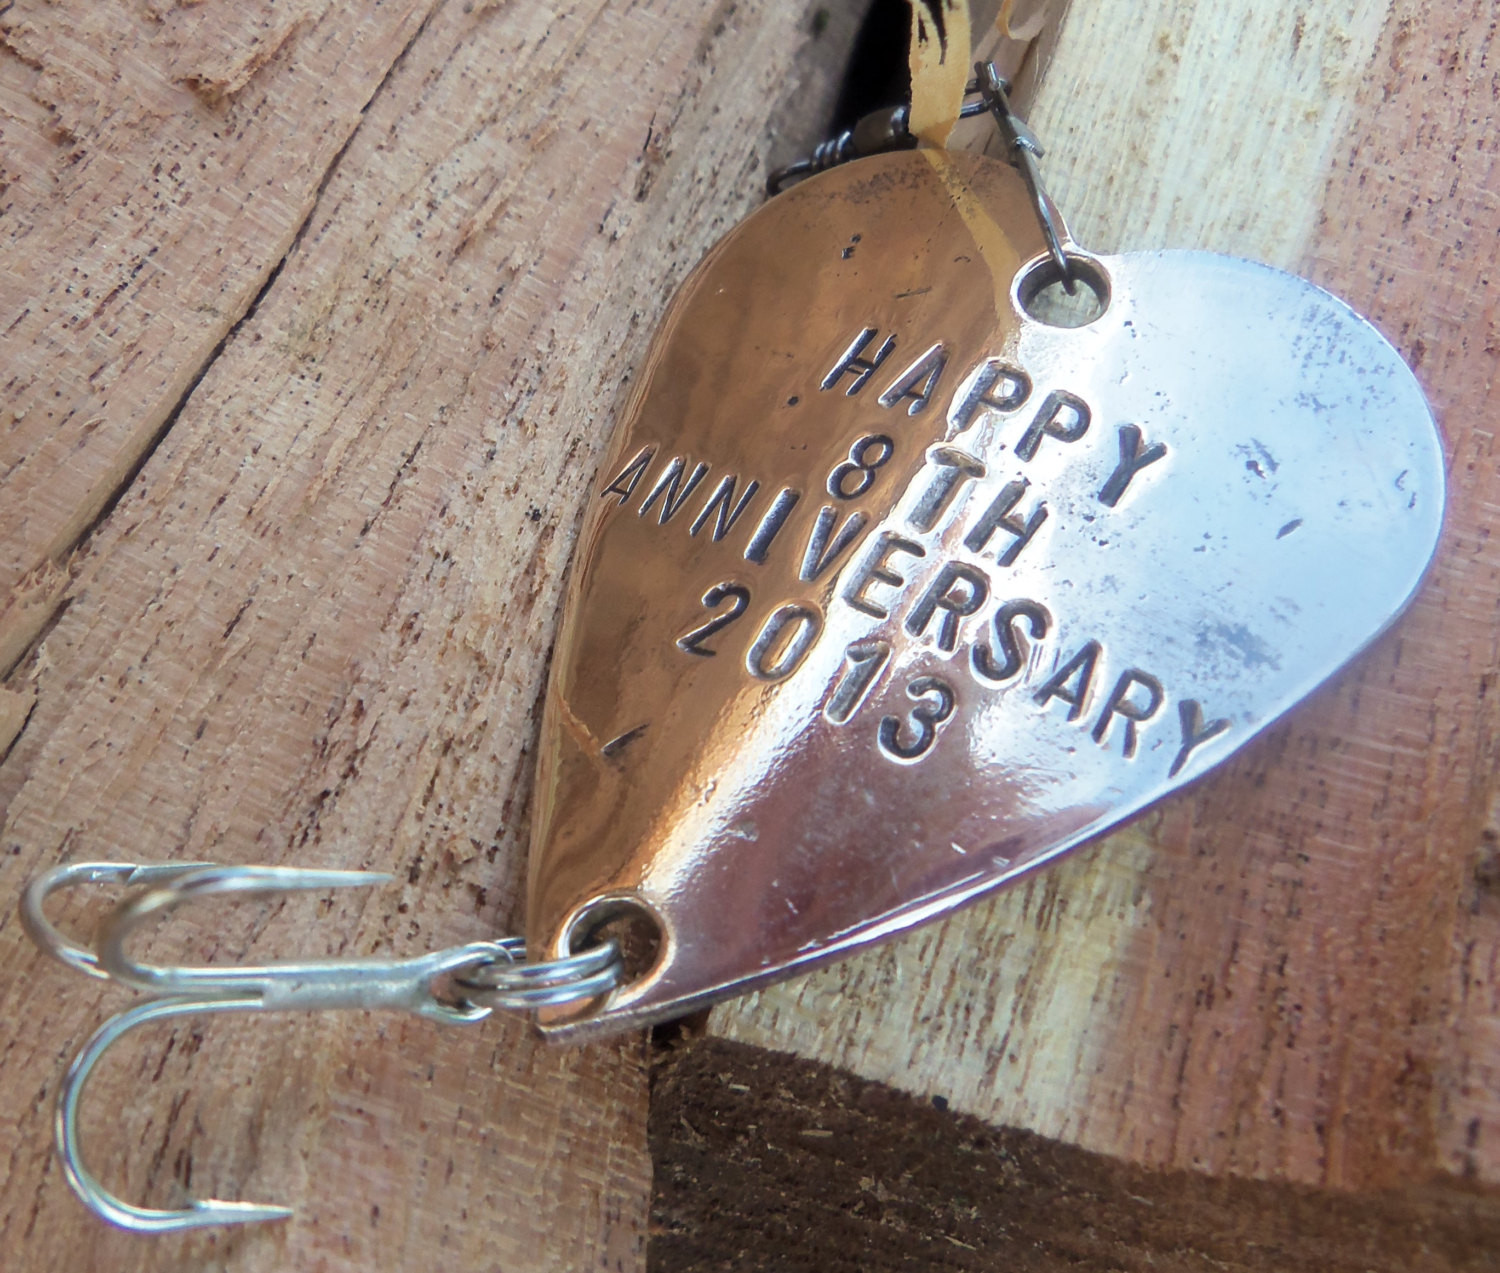 8th Wedding Anniversary Gifts
 Eighth Anniversary Gift for 8th Wedding by CandTCustomLures